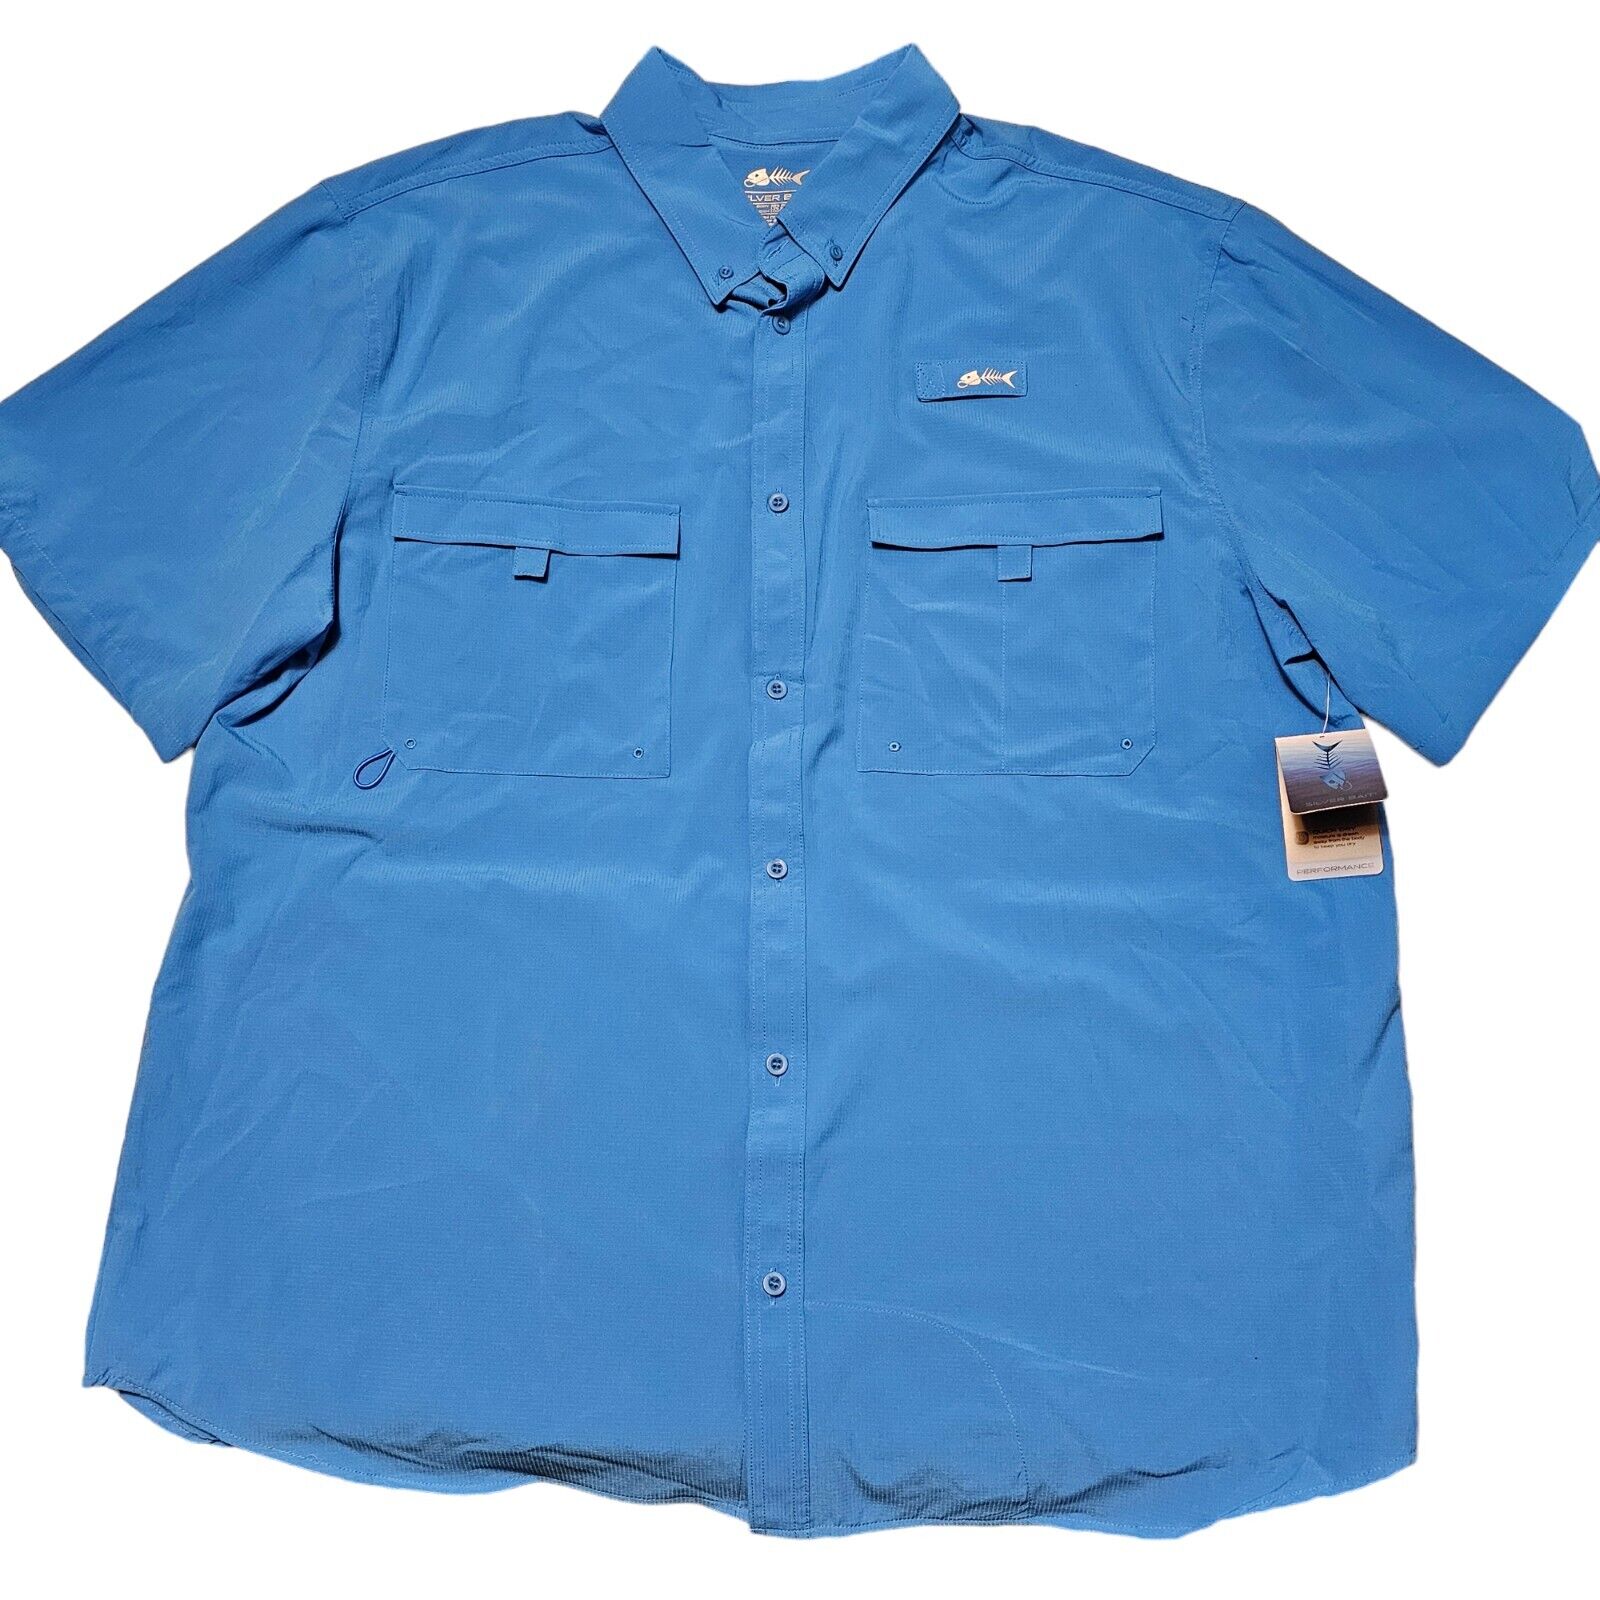 Silver Bait Mens Blue Outdoors Fishing Button Up Short Sleeve Vented Shirt 3XLT